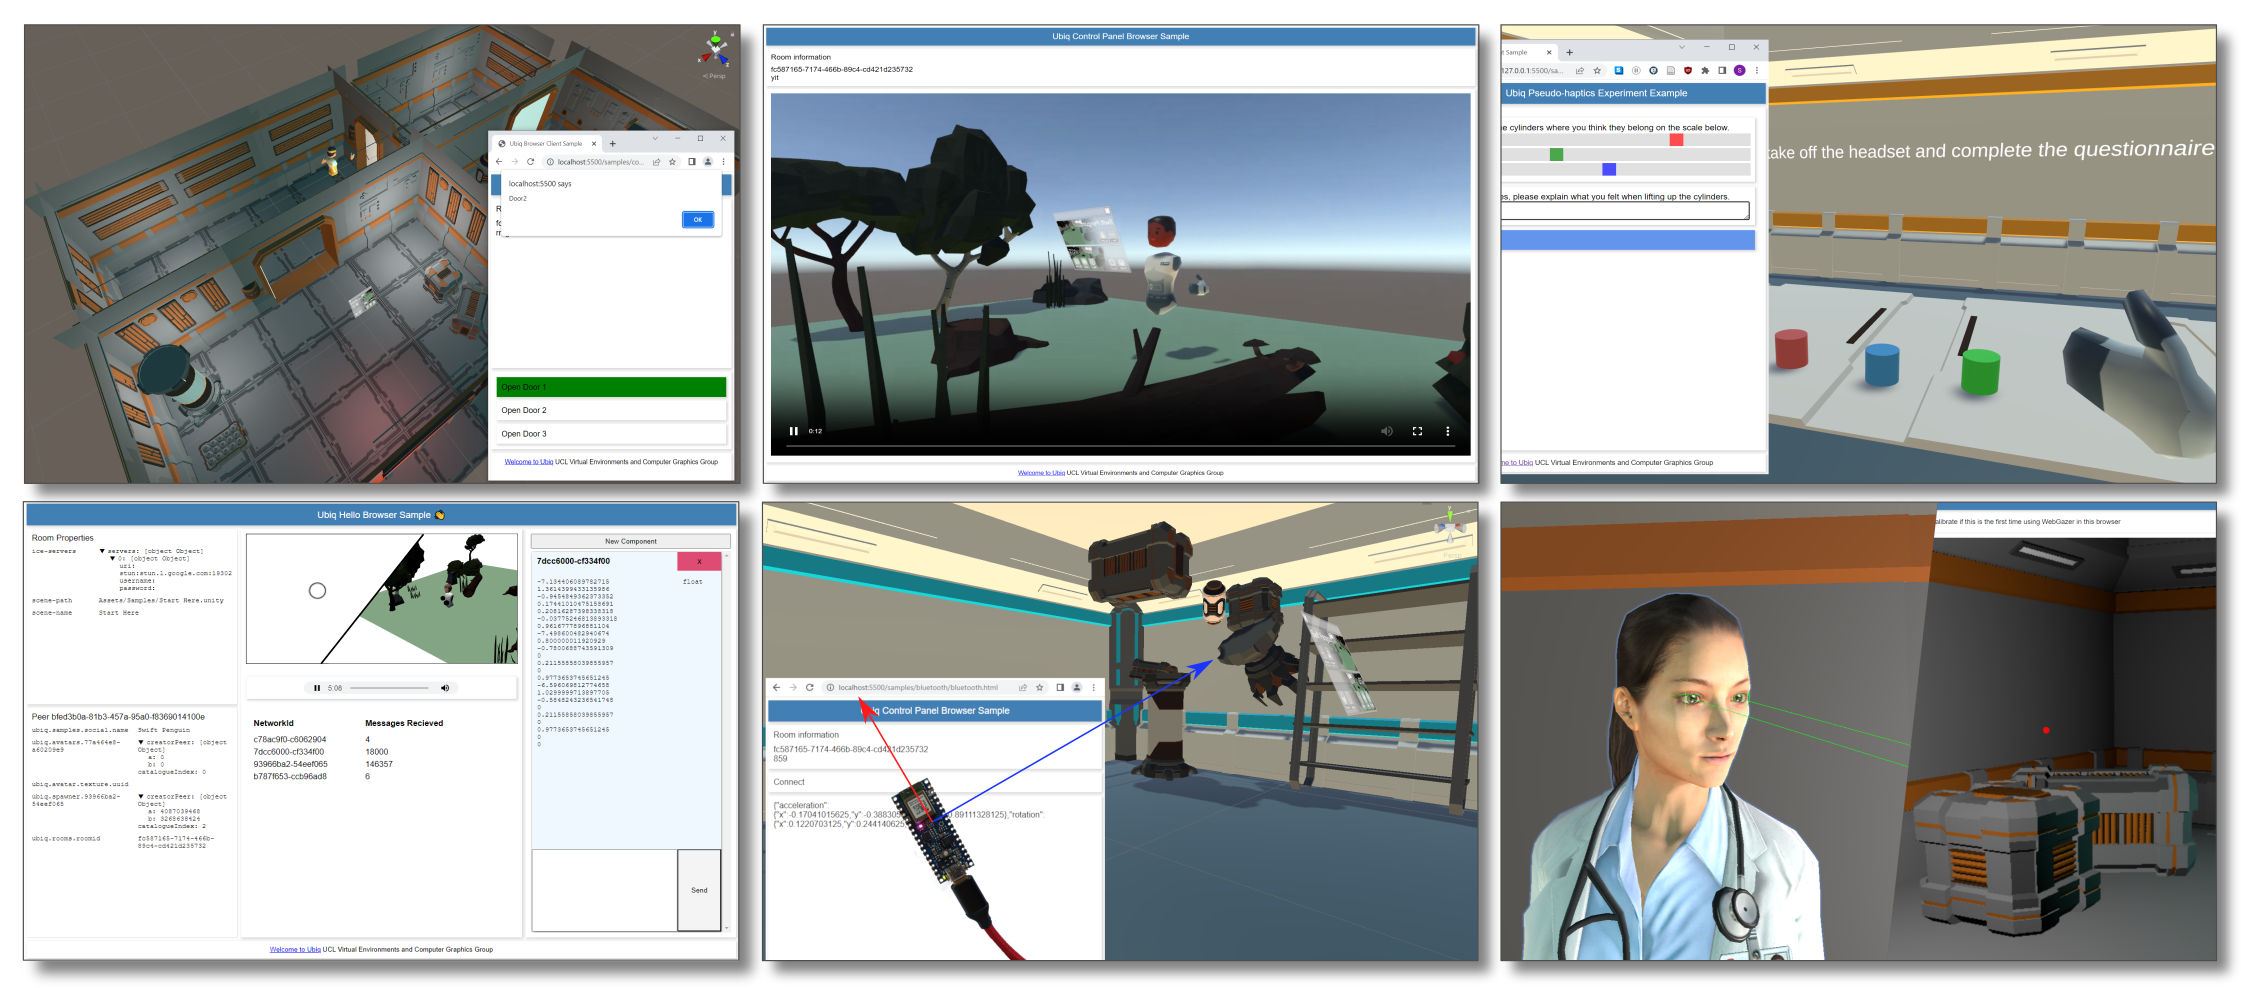 Six multi-modal proof of concepts of extending a social virtual reality system with web interoperability (from left to right, top row first): remote environment control, remote video streaming from a user view, directly triggering a desktop questionnaire for a user, online diagnostics and instrumentation, novel device support, and eye tracking to control a character.